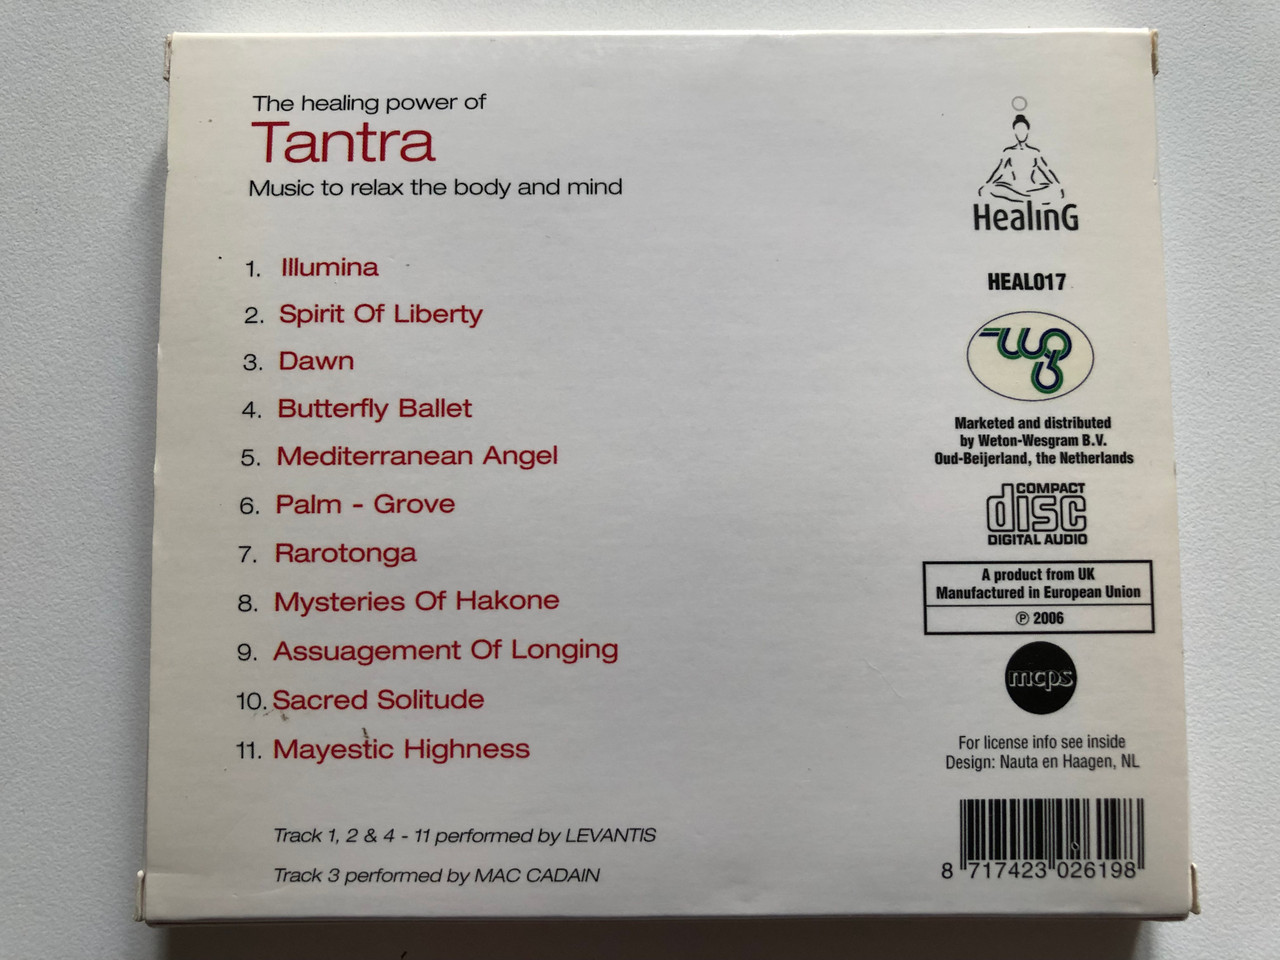 https://cdn11.bigcommerce.com/s-62bdpkt7pb/products/0/images/322755/The_Healing_Power_Of_Tantra_-_Music_to_relax_the_body_and_mind_Healing_Audio_CD_2006_HEAL017_2__72319.1706613030.1280.1280.JPG?c=2